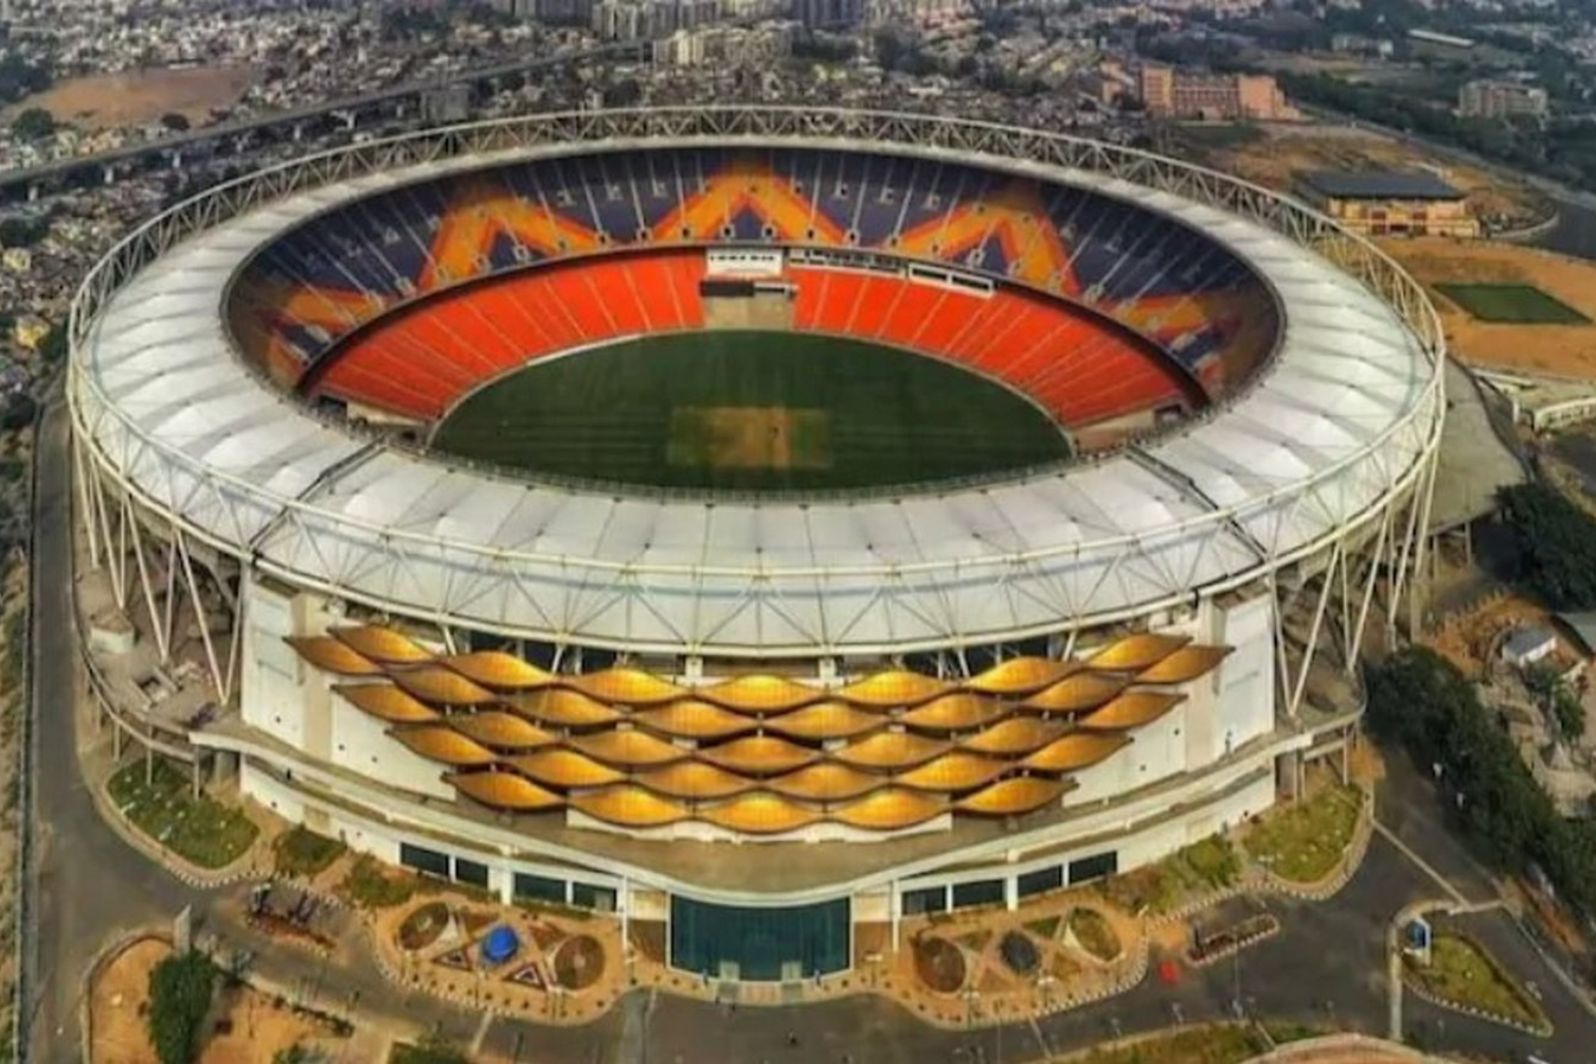 2nd largest cricket stadium in the world